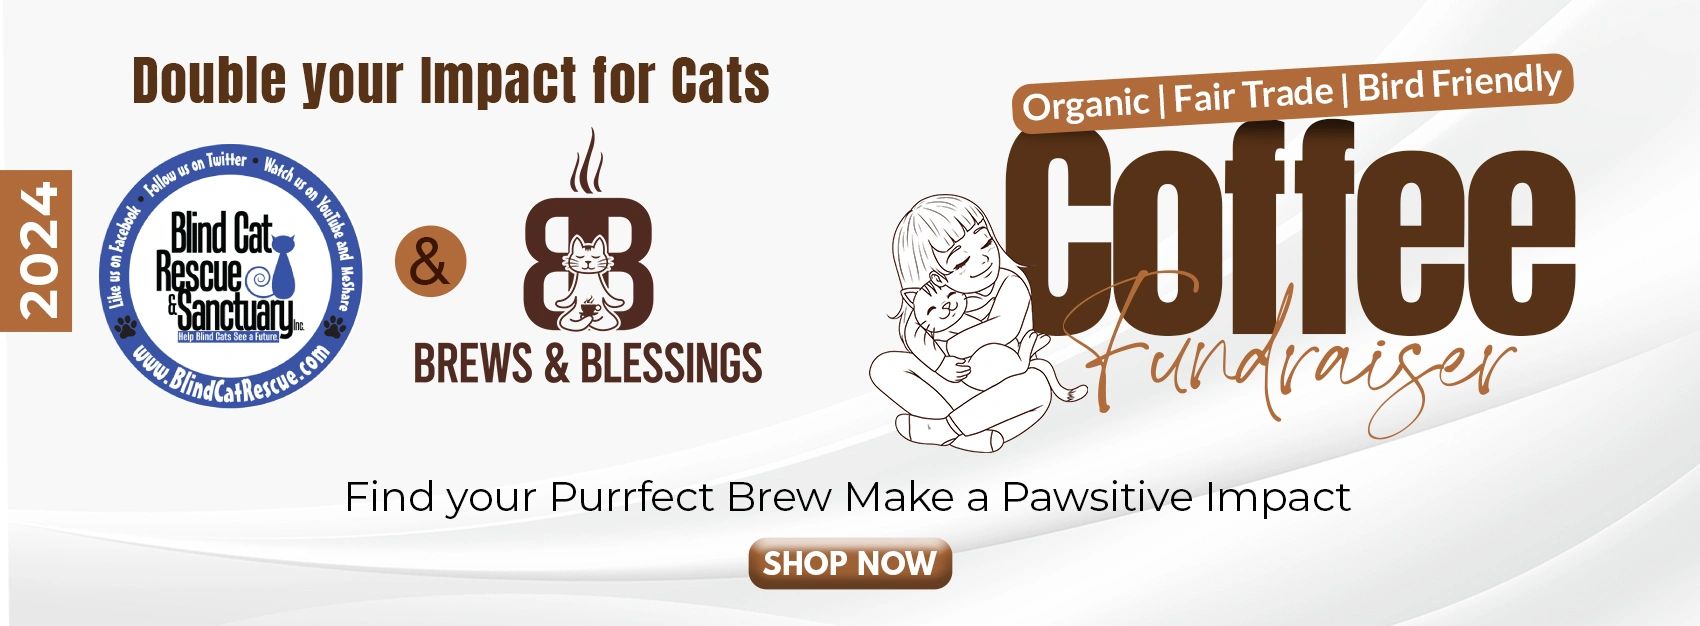 Support Blind Cat Rescue & Sanctuary by buying organic coffee